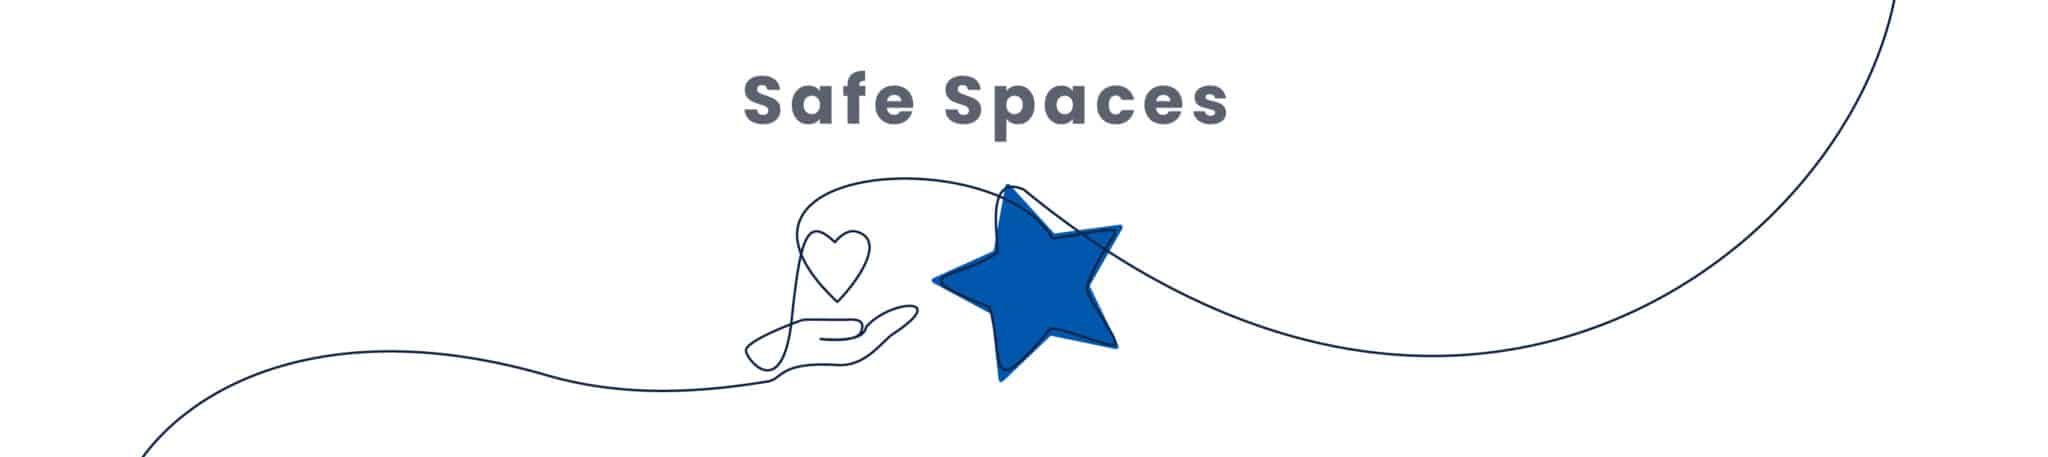 Illustration with the text "Safe Spaces," showing a hand holding a blue star connected by a line to a heart scribble.